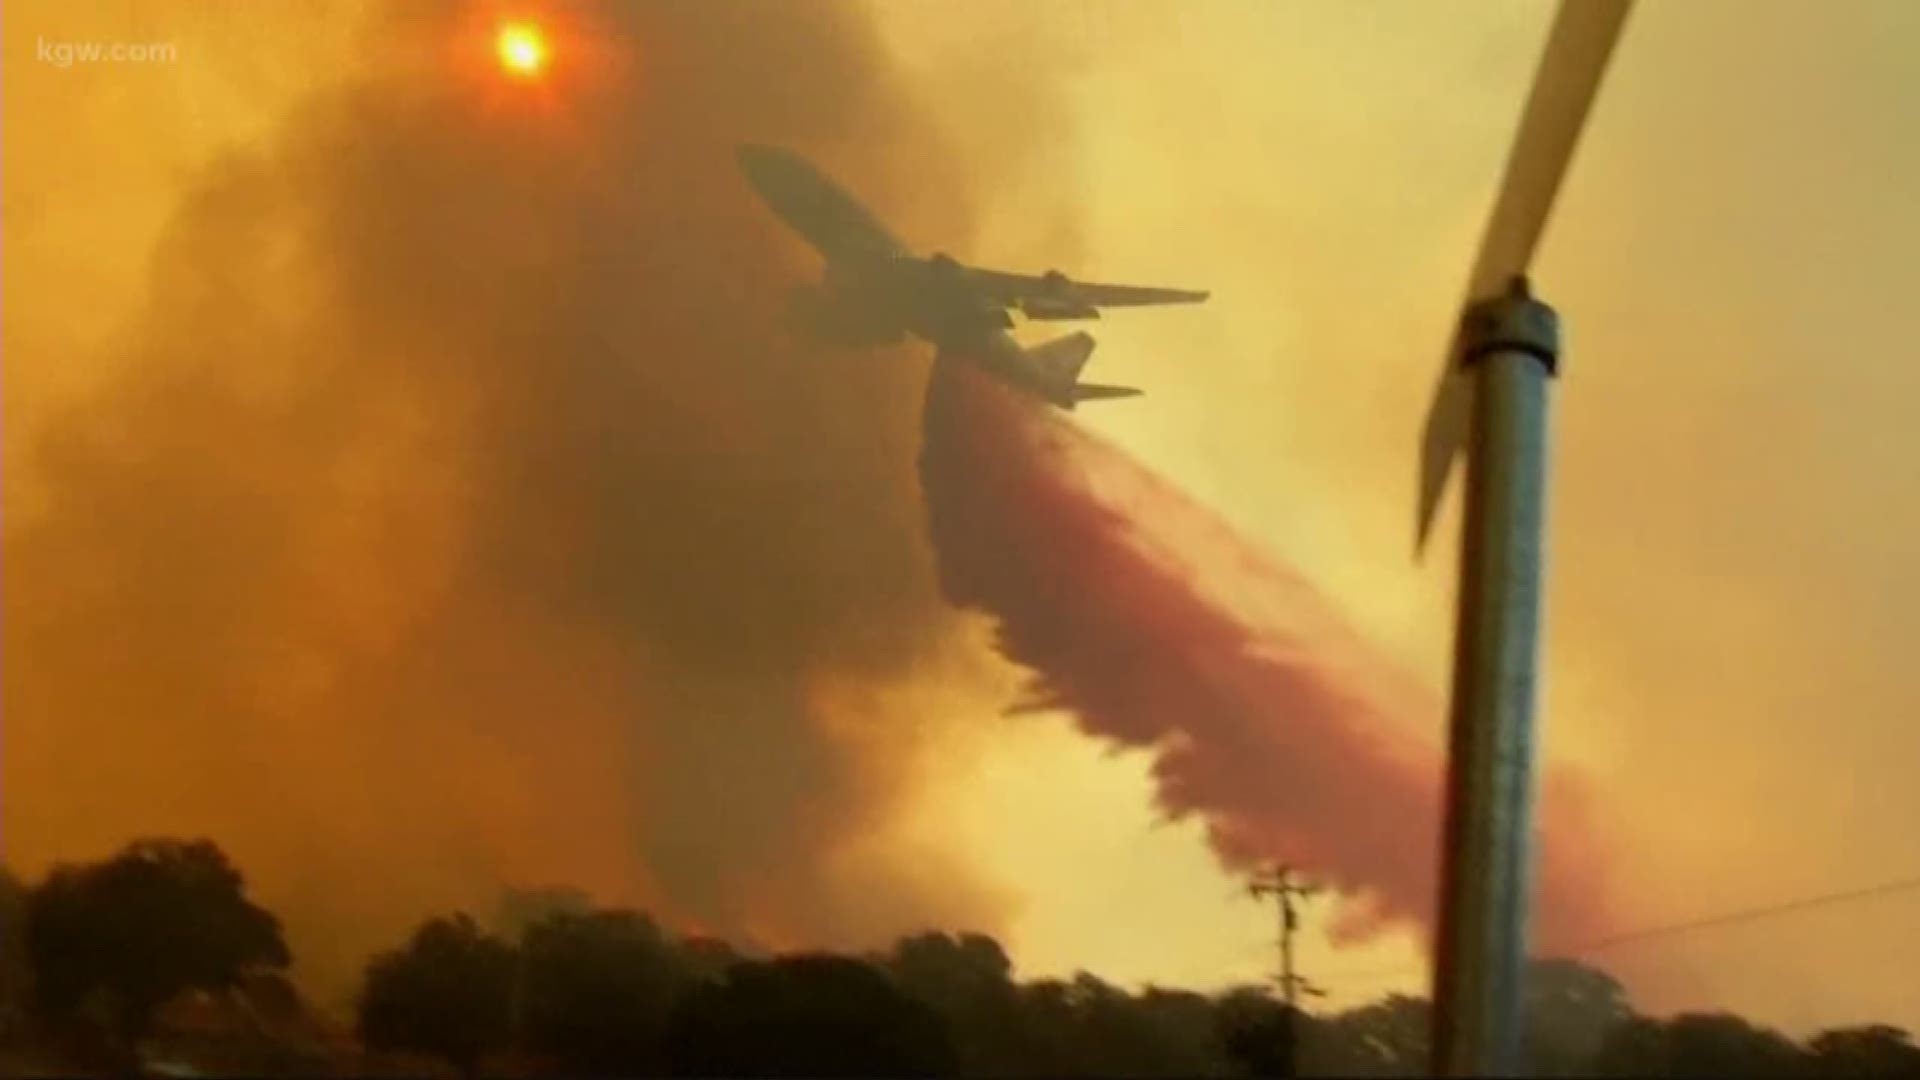 Is this year the worst for California wildfires?